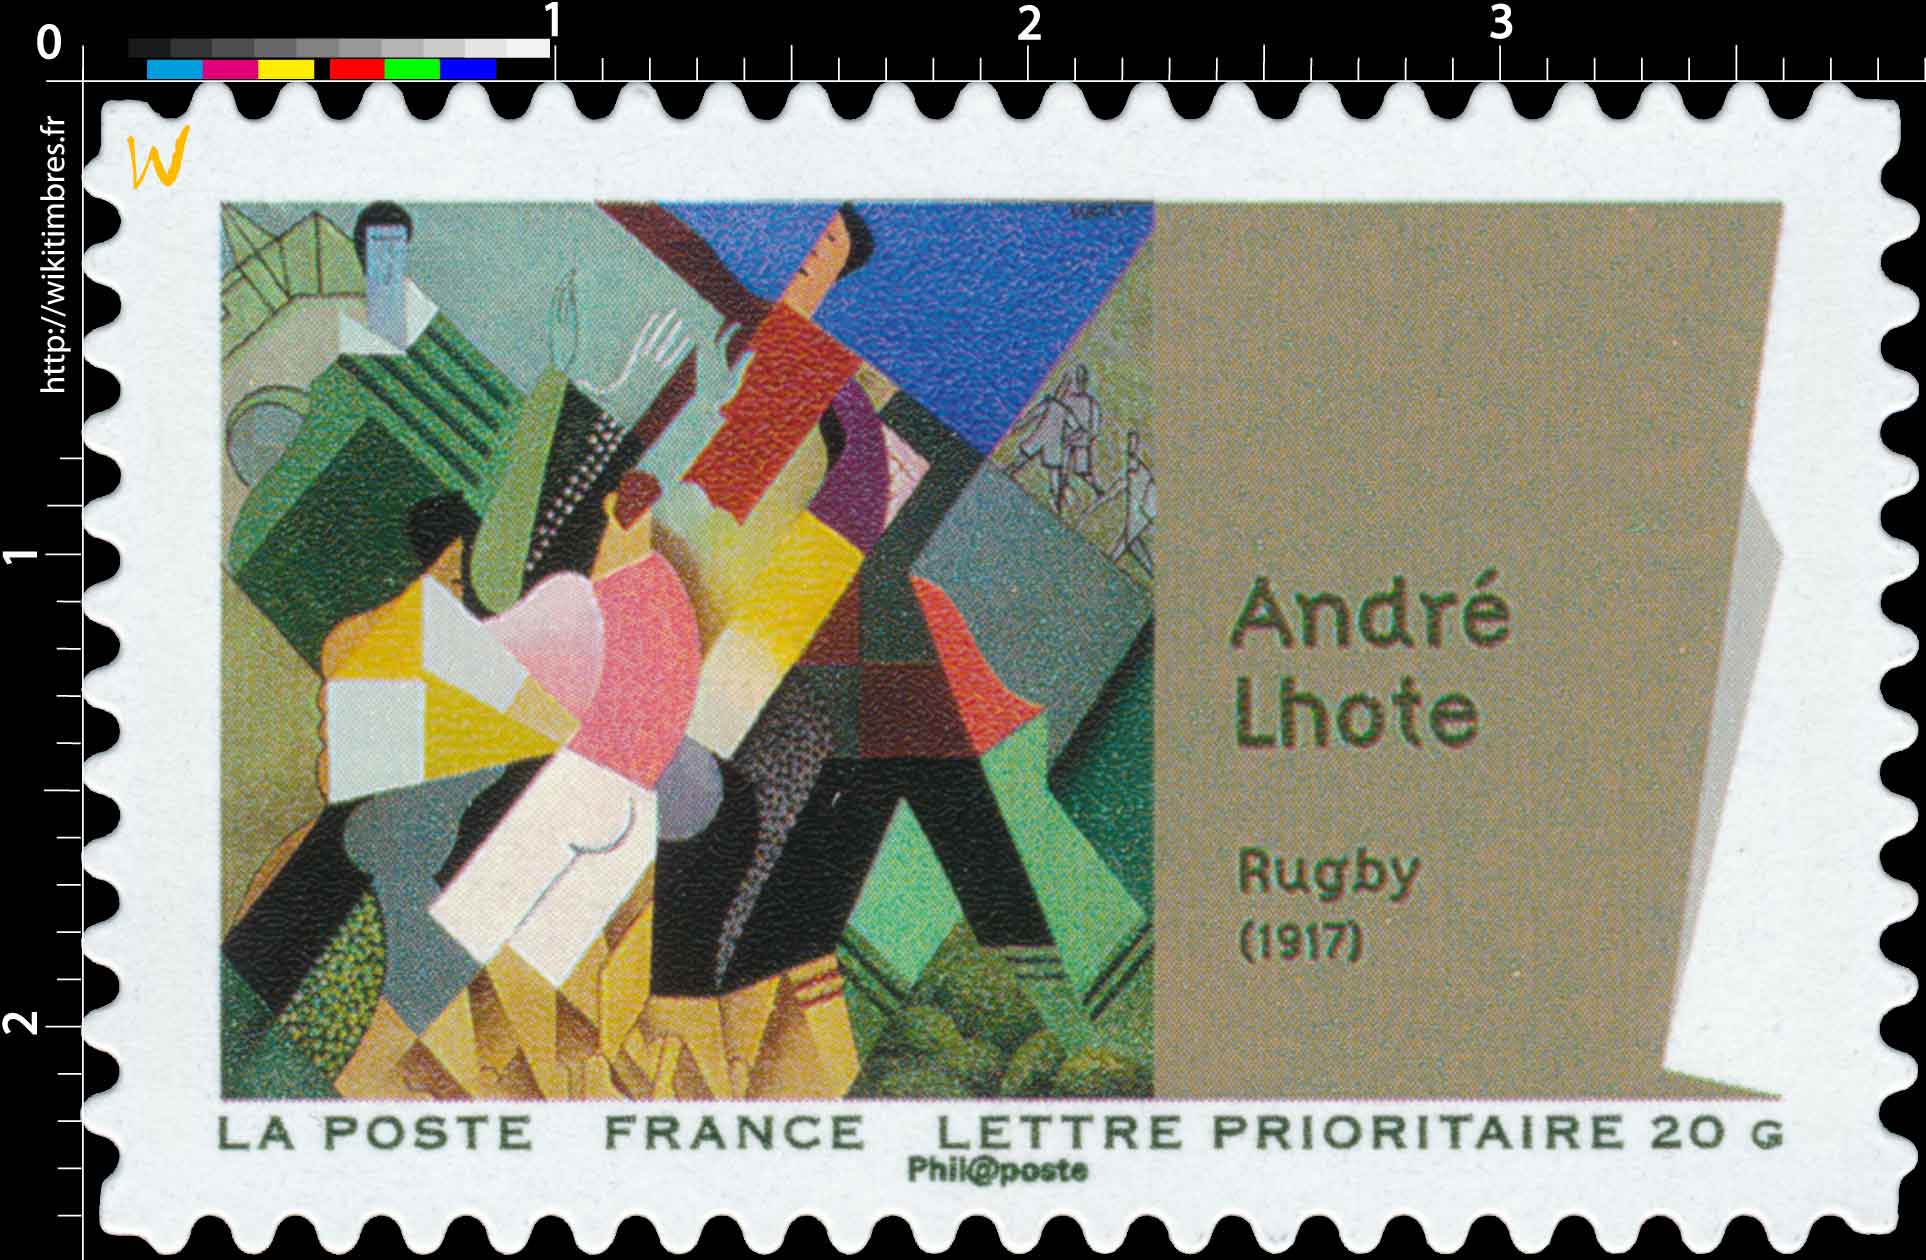 André Lhote Rugby (1917)